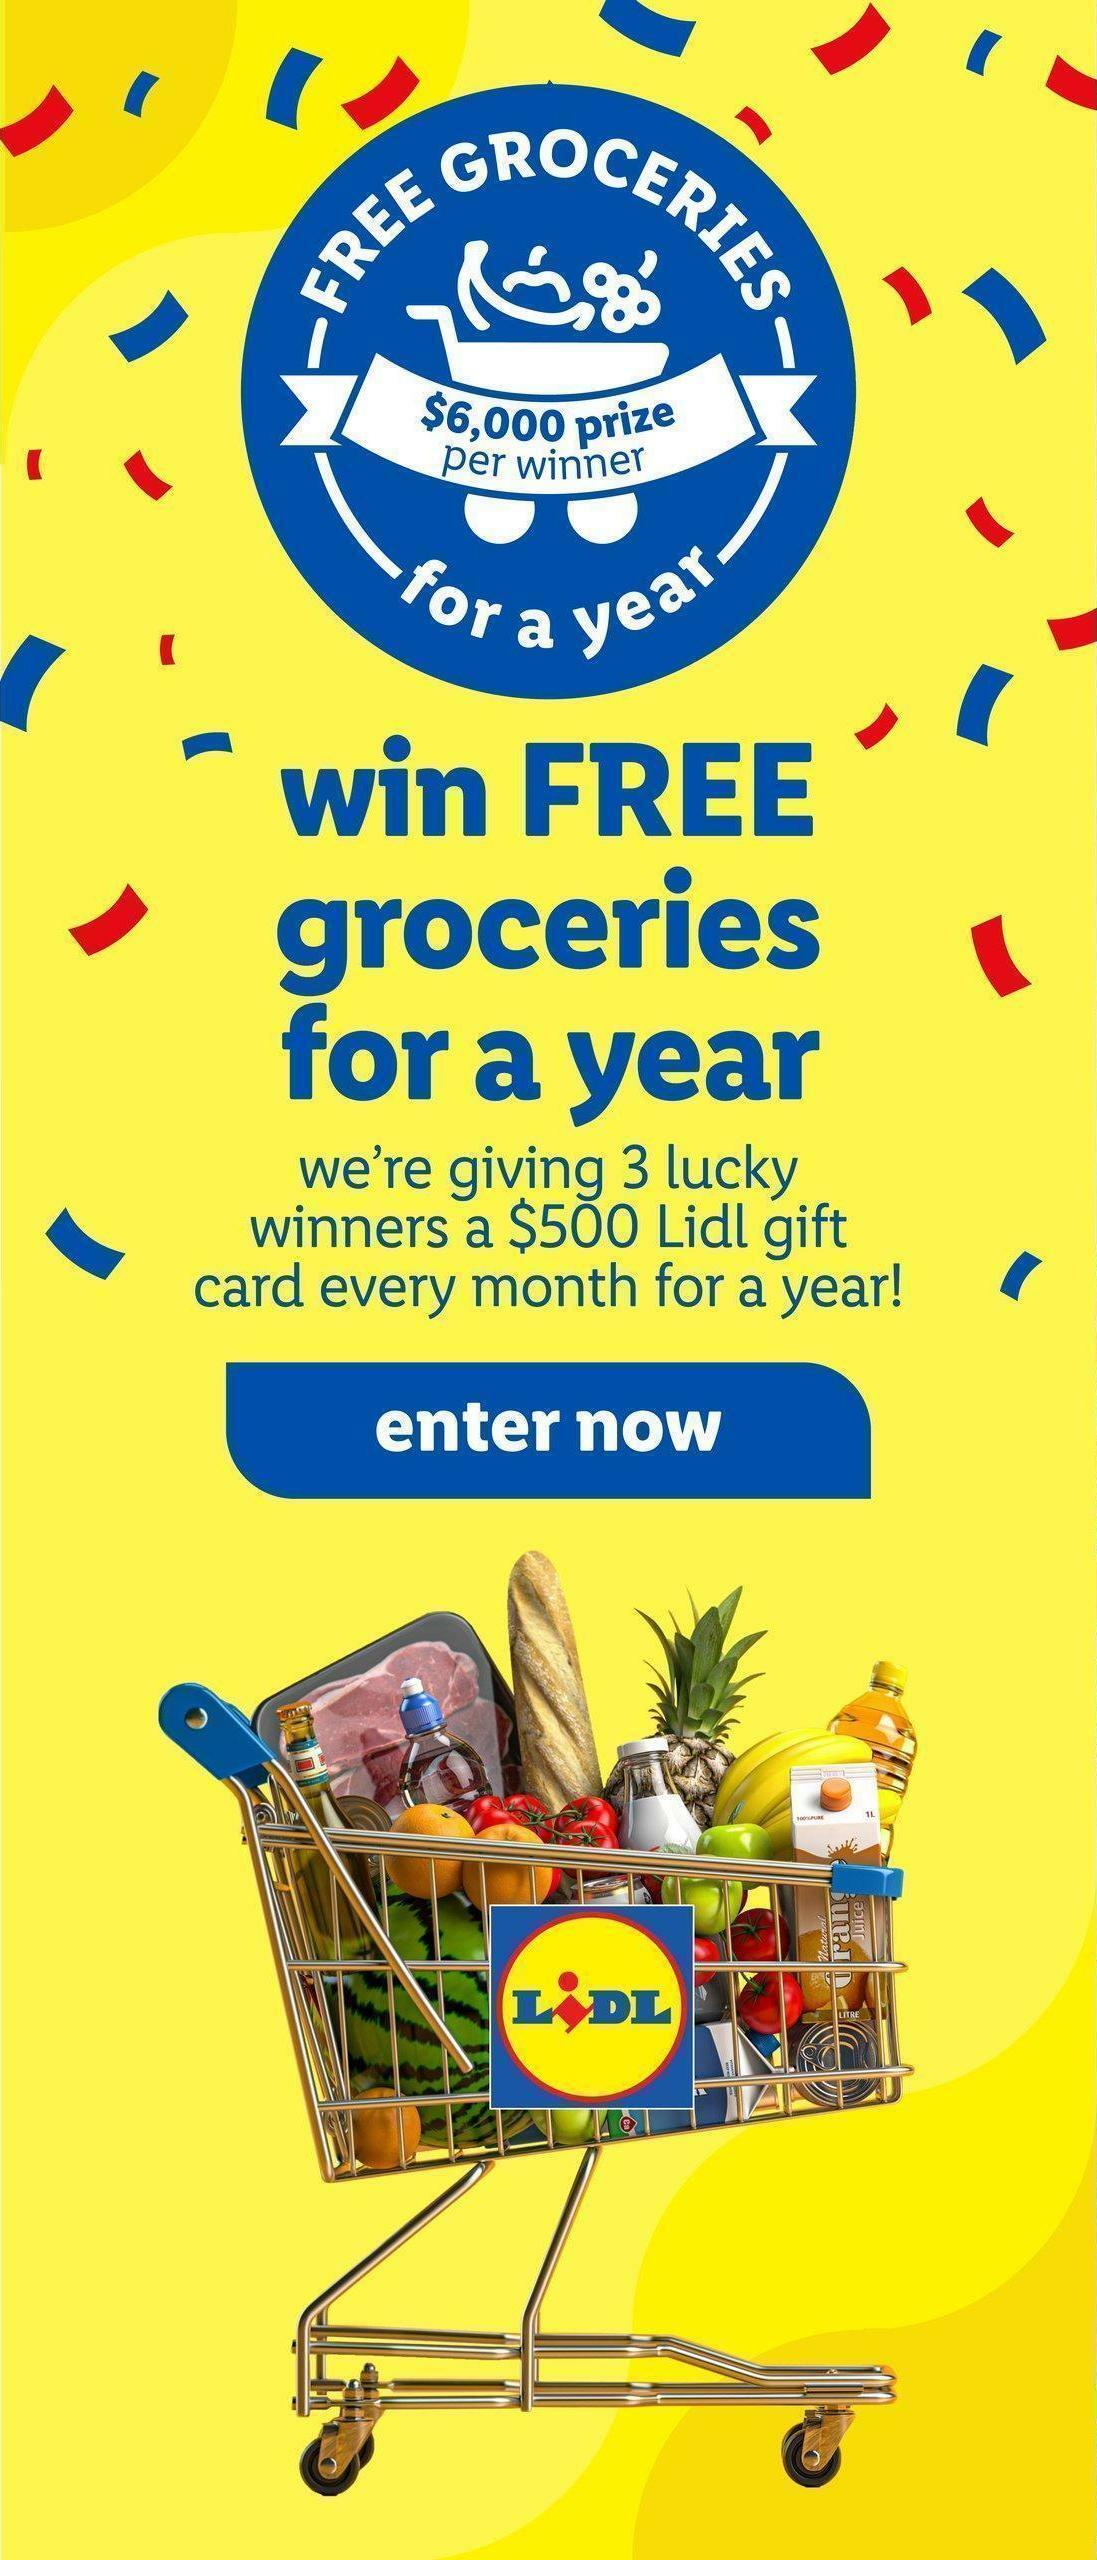 LIDL Weekly Ad from January 11